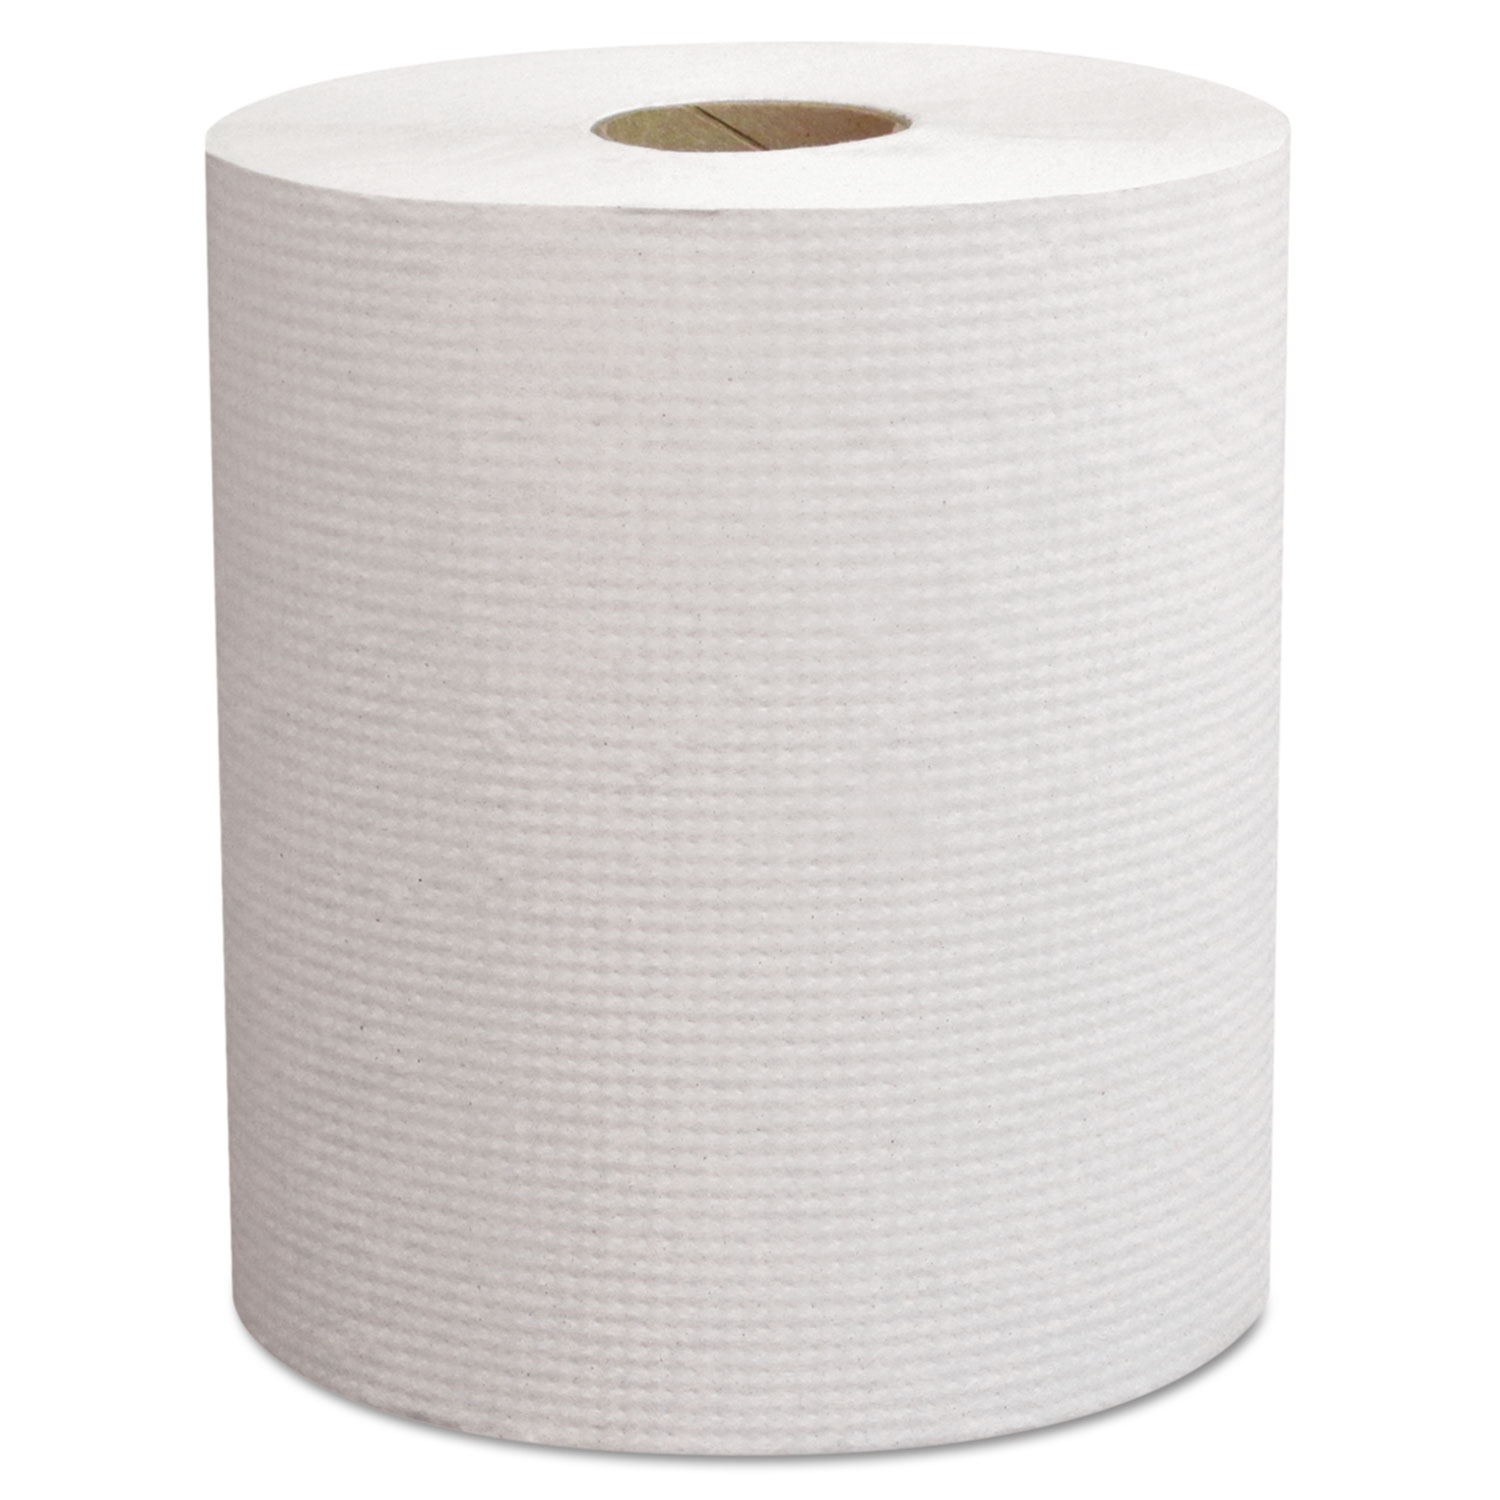 Select Roll Paper Towels, White, 7.9 x 800 ft, 6/Carton